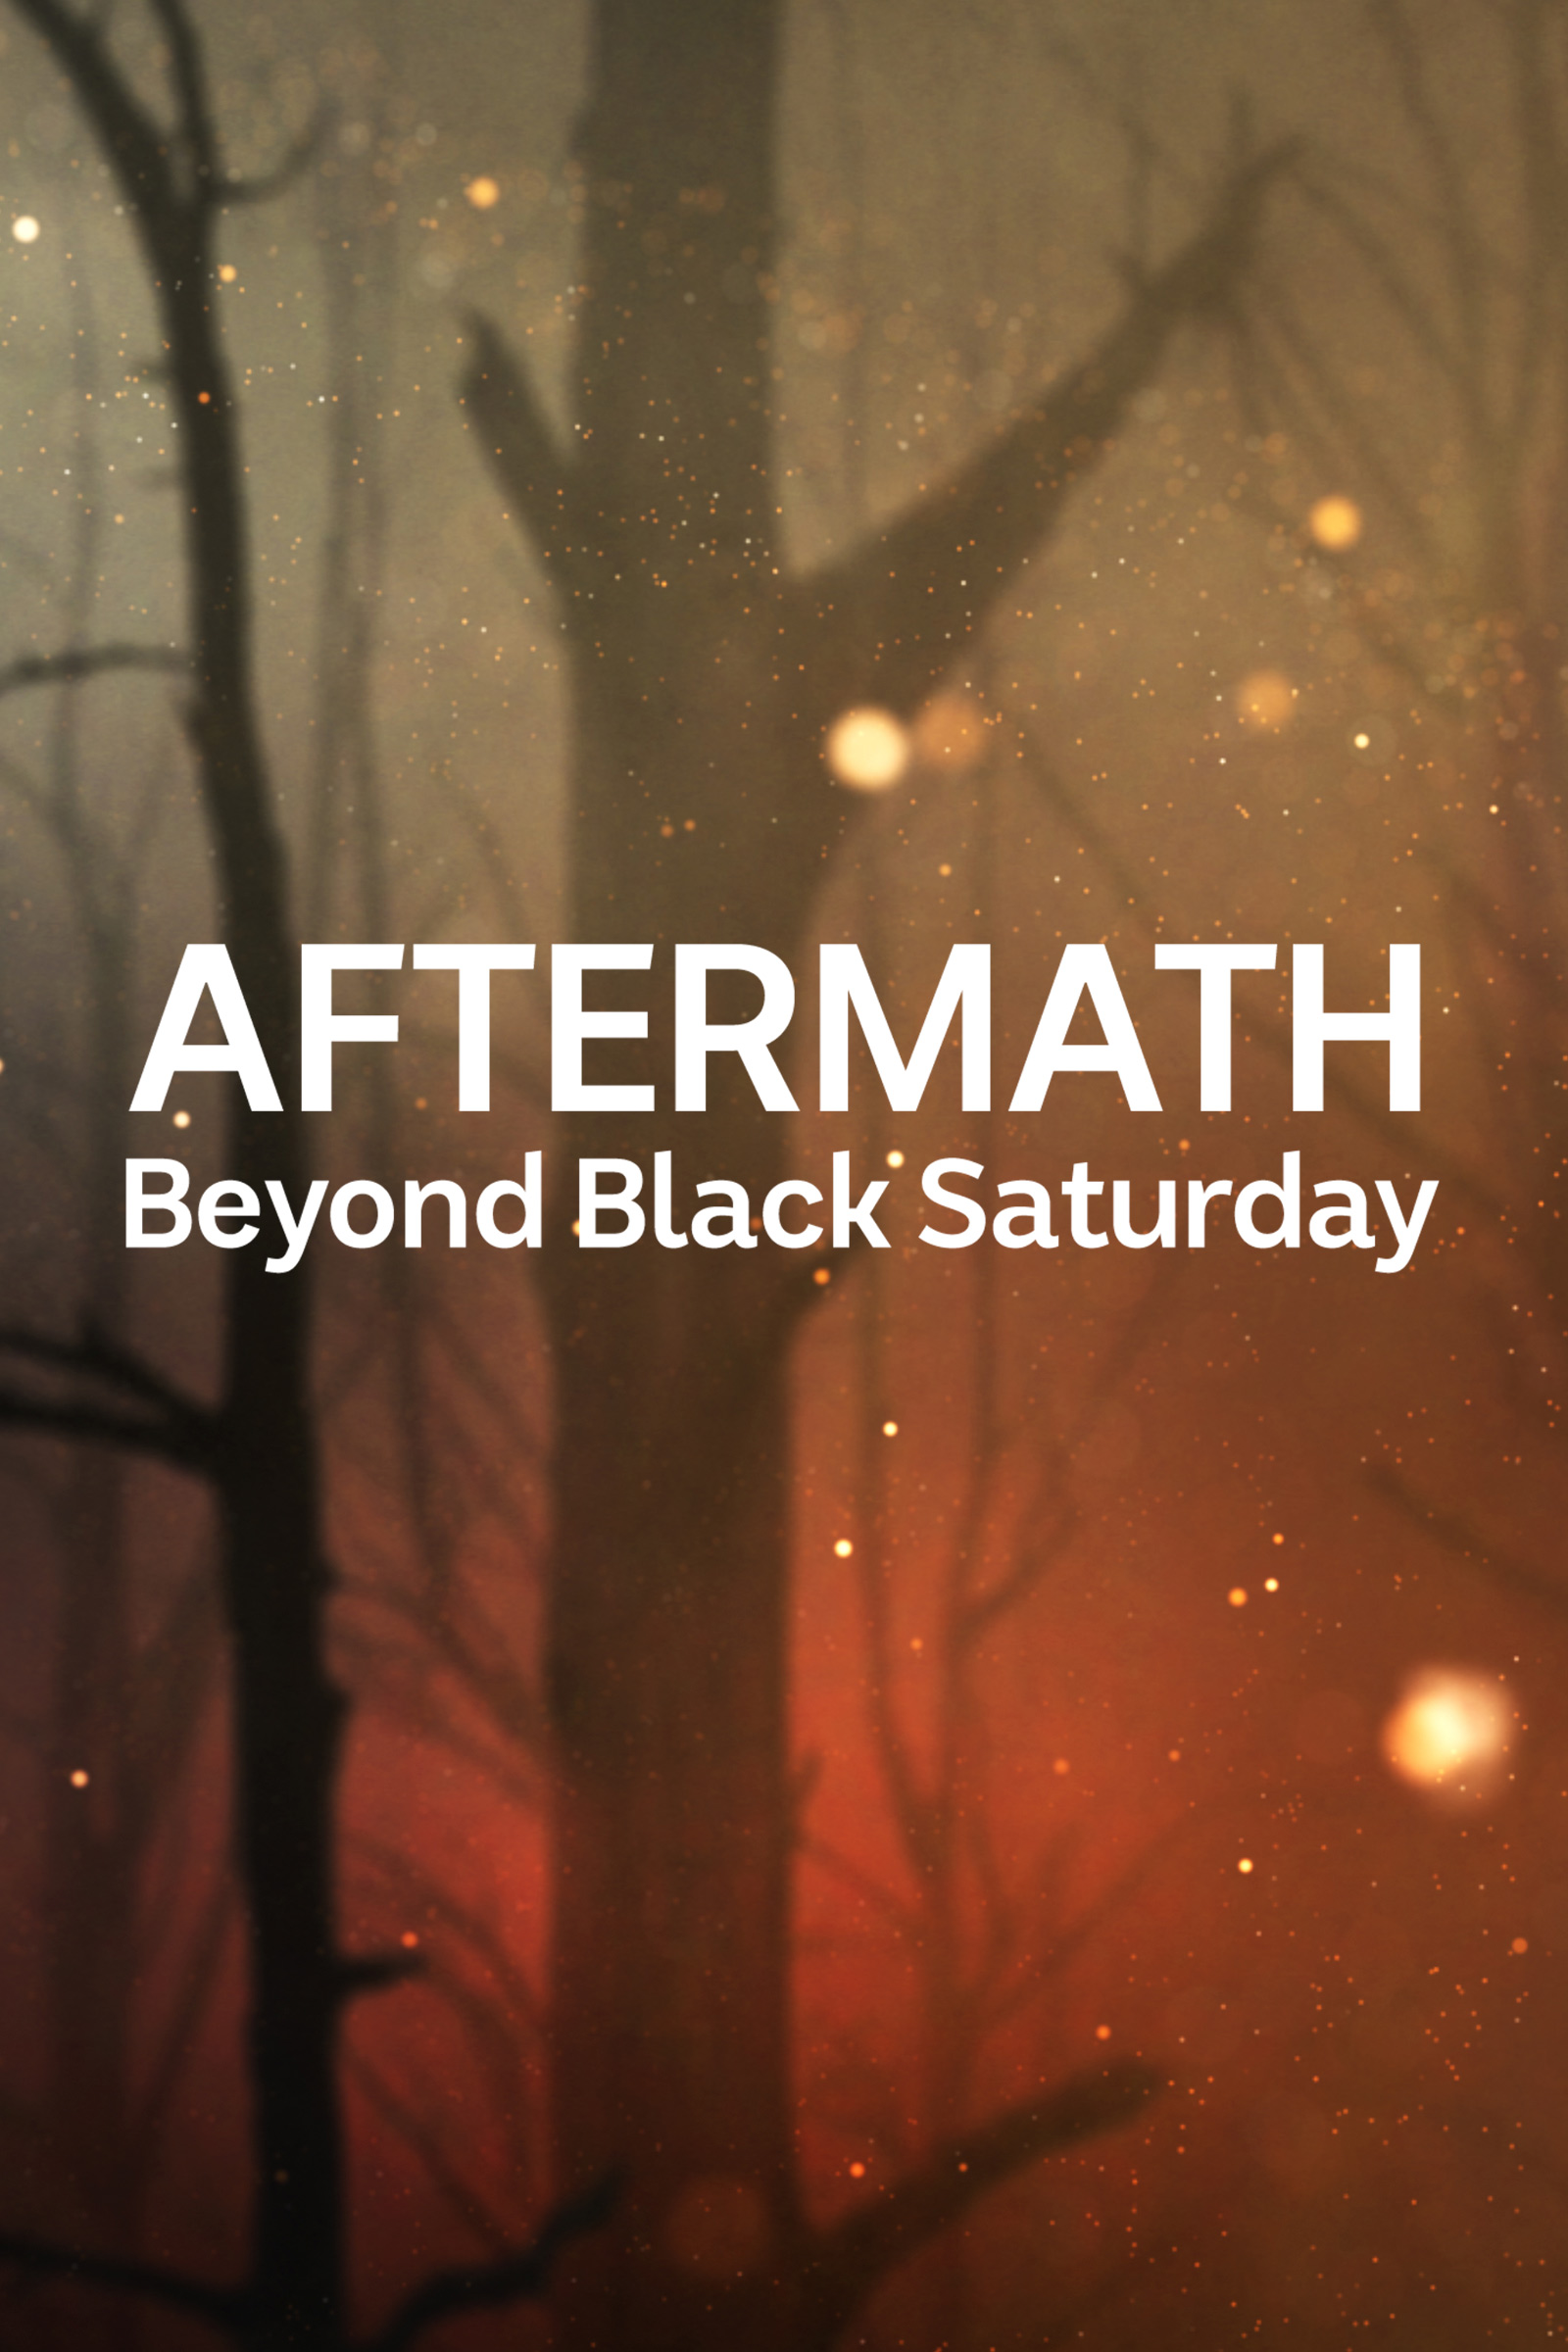 Where to stream Aftermath: Beyond Black Saturday